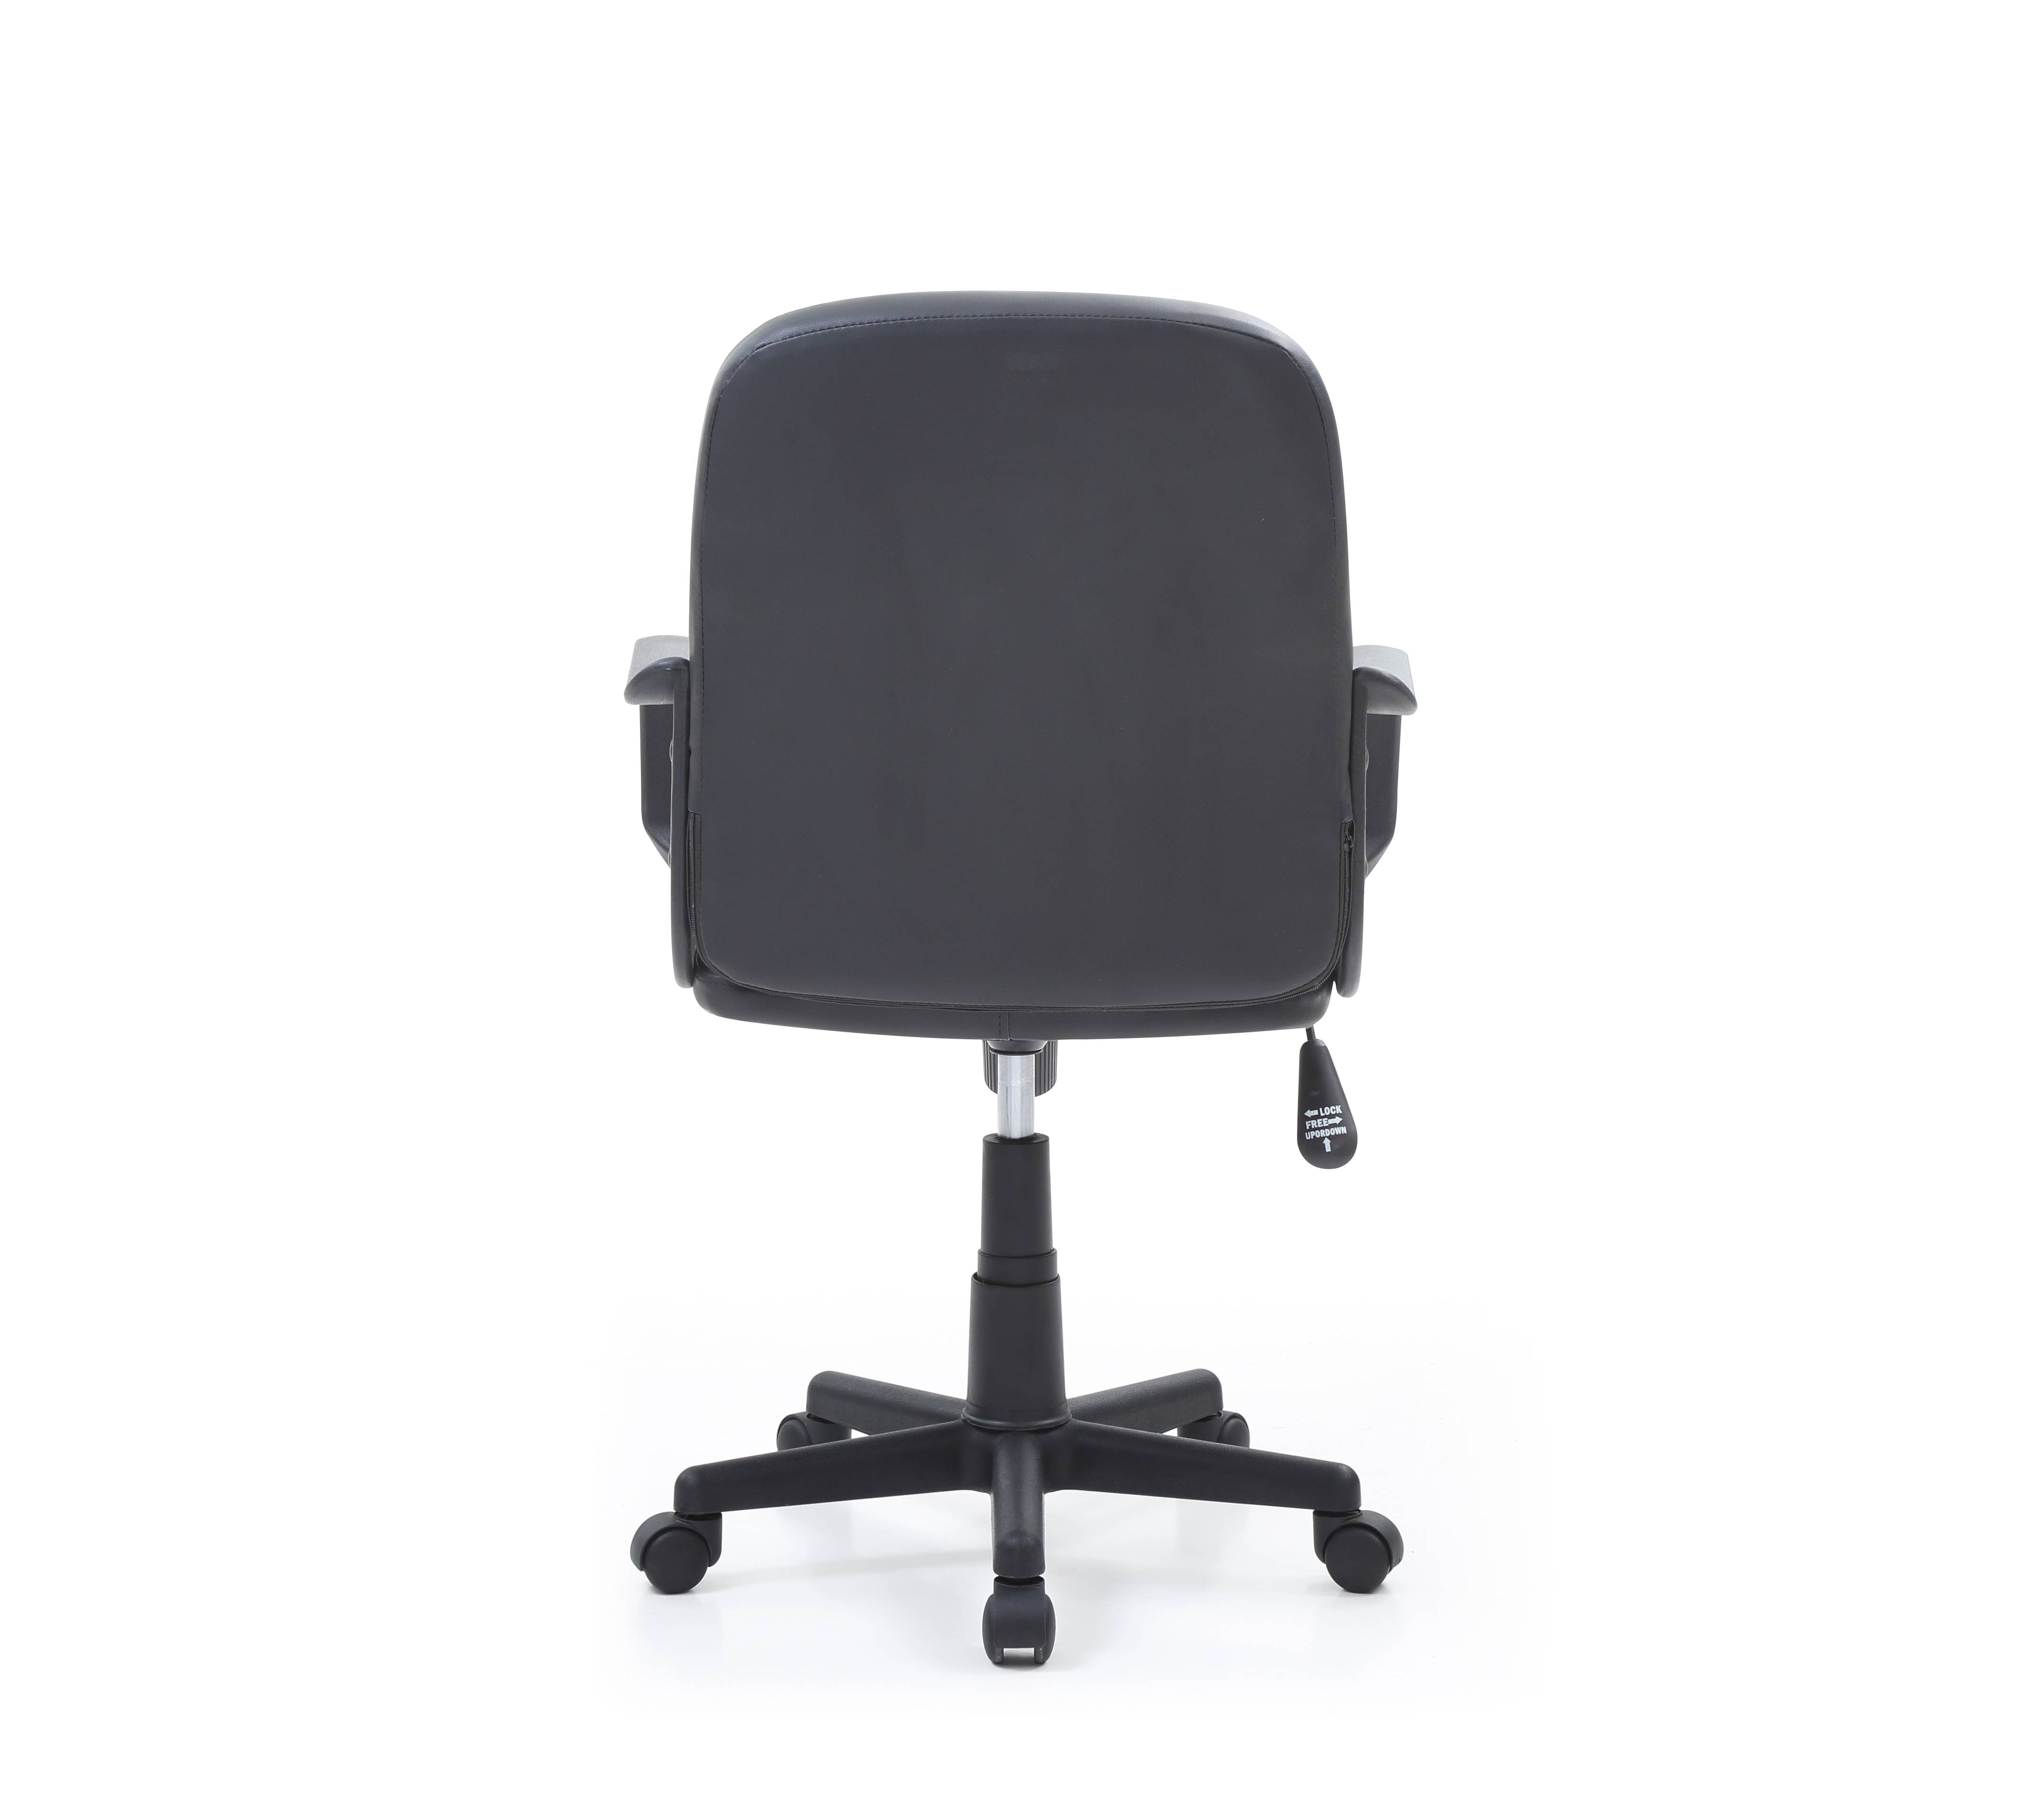 Hodedah 19.5 in Manager's Chair with Adjustable Height & Swivel, 200 lb. Capacity, Black - image 4 of 5